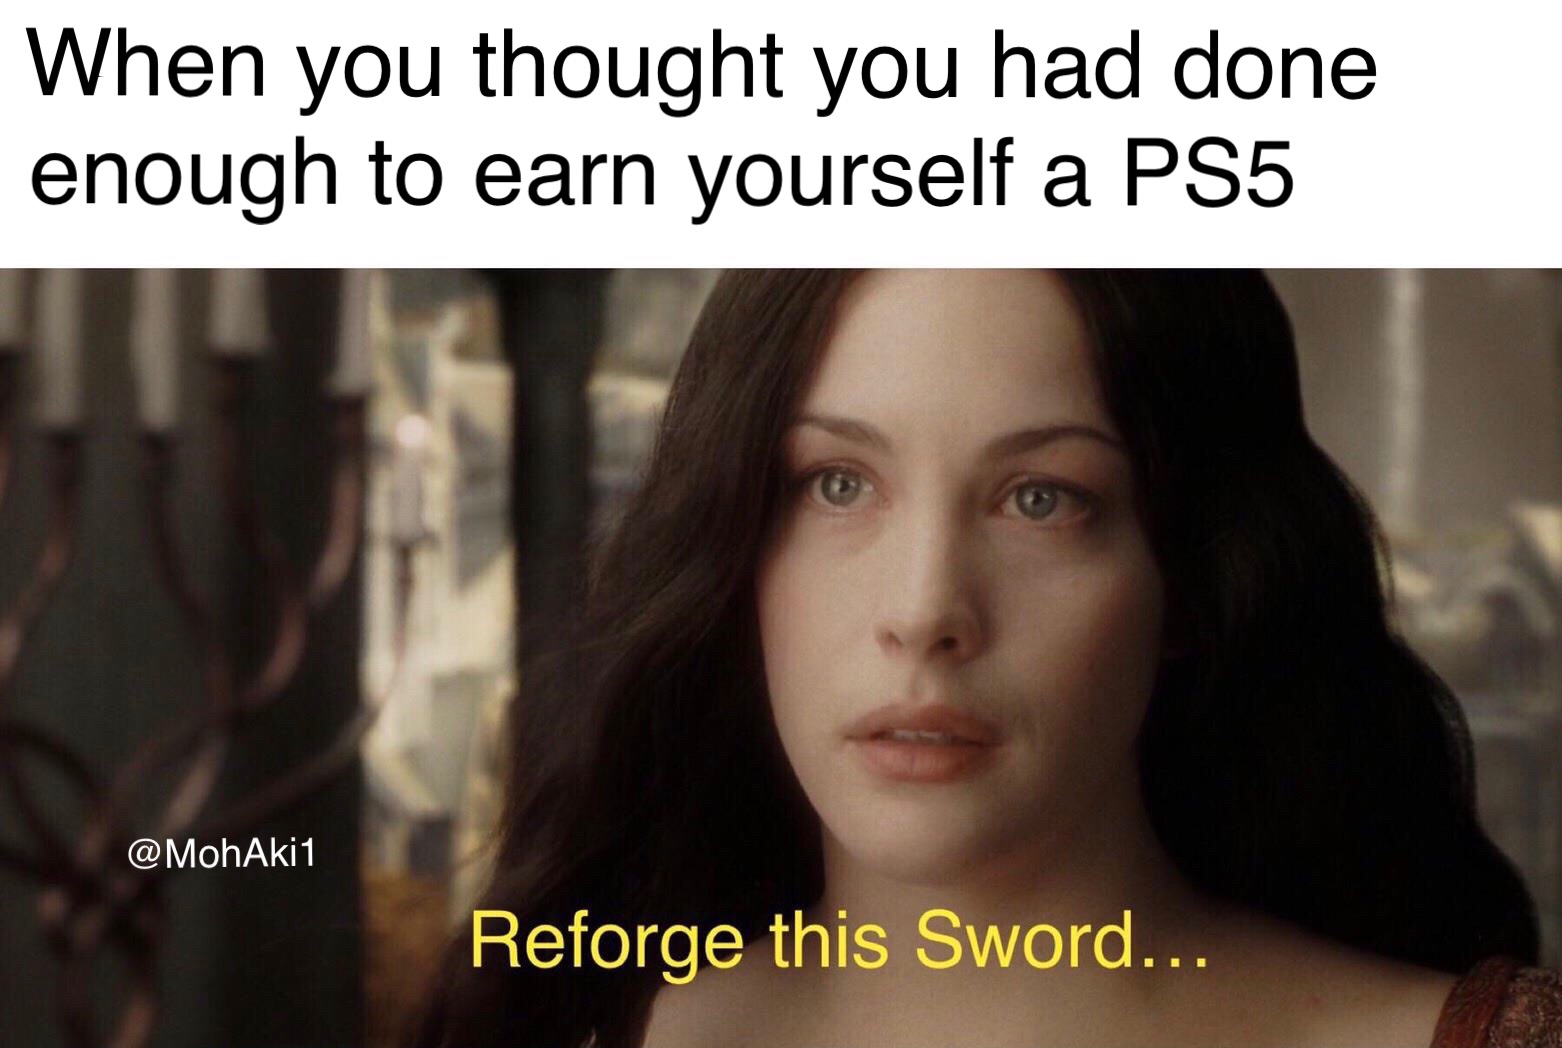 When you thought you had done enough to earn yourself a PS5 Reforge this Sword...